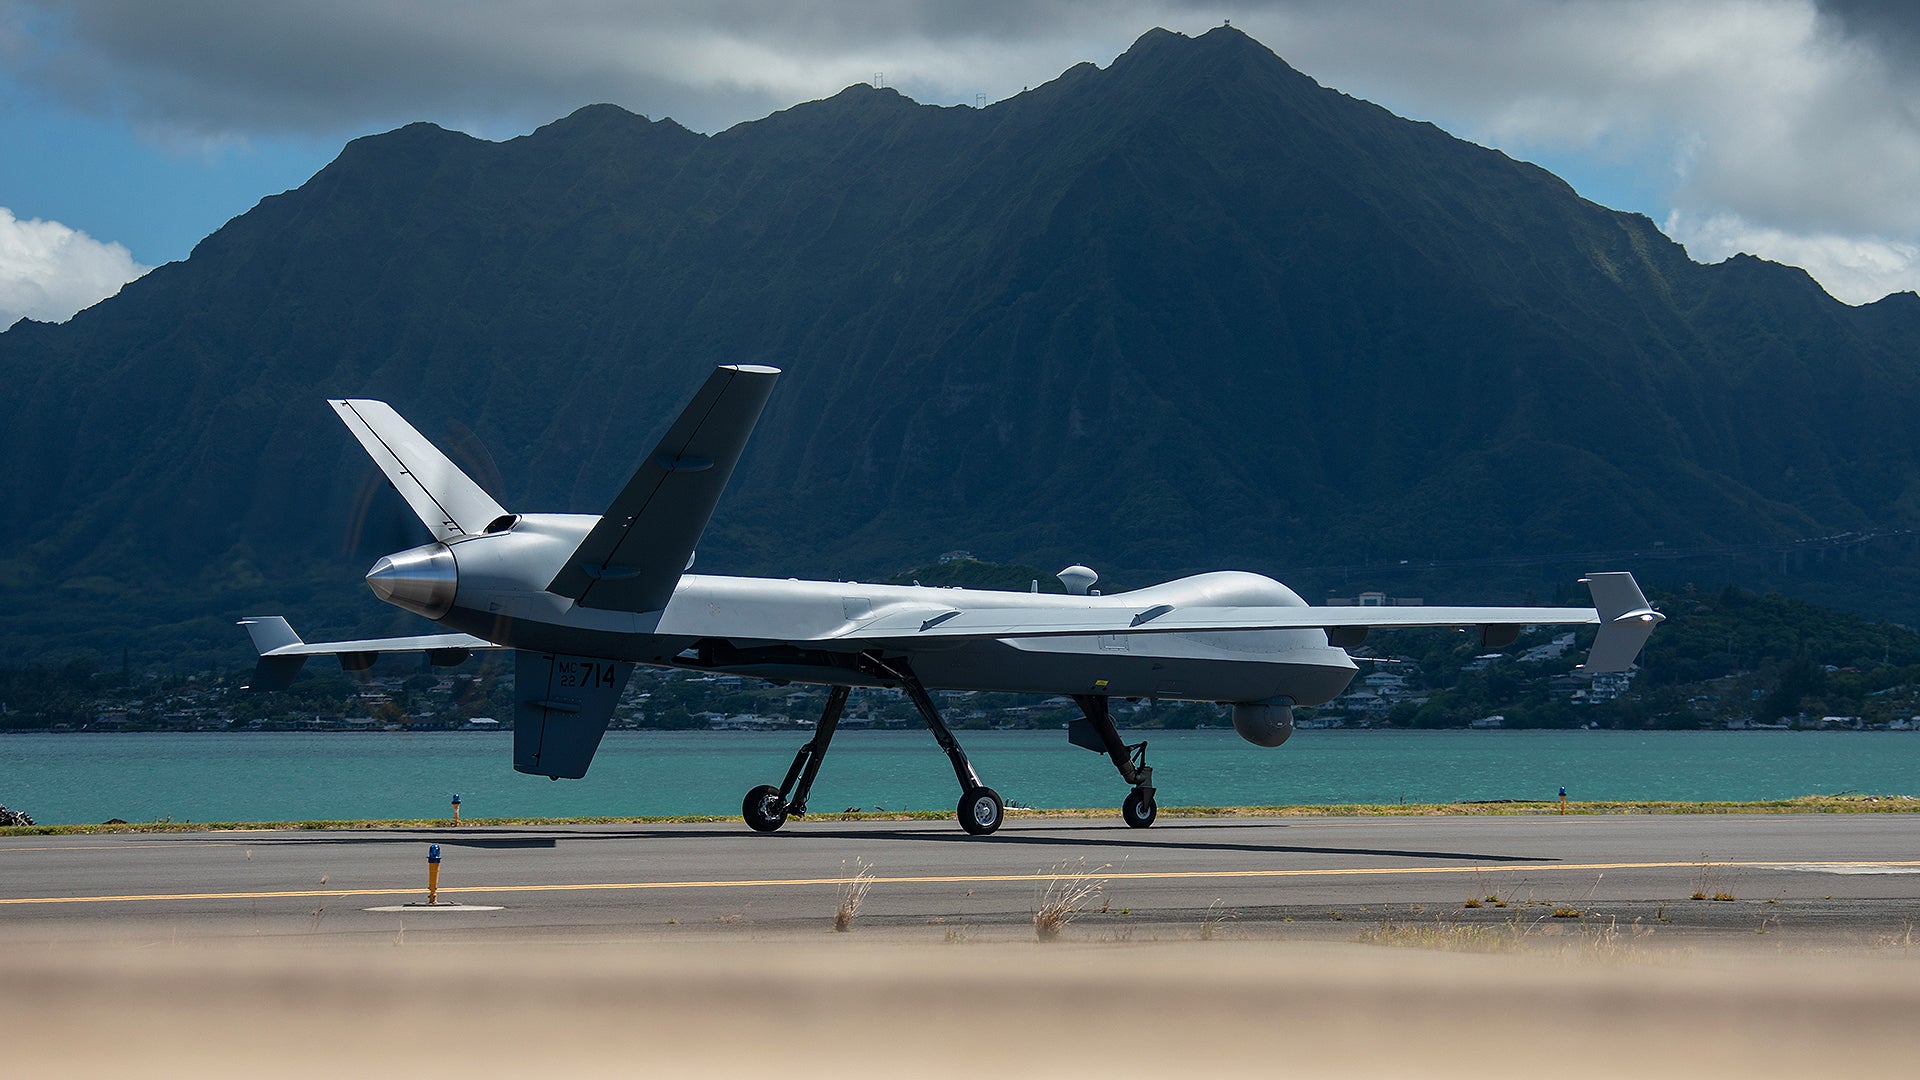 U.S. Marine Corps Marine Unmanned Aerial Vehicle Squadron (VMU) 3, Marine Aircraft Group 24, maneuvers an MQ-9A down the flight line on Marine Corps Air Station Kaneohe Bay, June 20, 2023. The MQ-9A is a remotely piloted aircraft capable of supporting a wide range of operations such as coastal and border surveillance, weapons tracking, embargo enforcement, humanitarian and disaster assistance, support of peacekeeping and counter-narcotic operations. VMU-3 supports the Marine Air-Ground Task Force by providing multi-surveillance and reconnaissance, data gateway and relay capabilities through an aerial layer, and enabling or conducting the detection and cross cueing or targets and facilitating their engagement during expeditionary, joint and combined operations. (U.S. Marine Corps photo by Cpl. Cody Purcell)